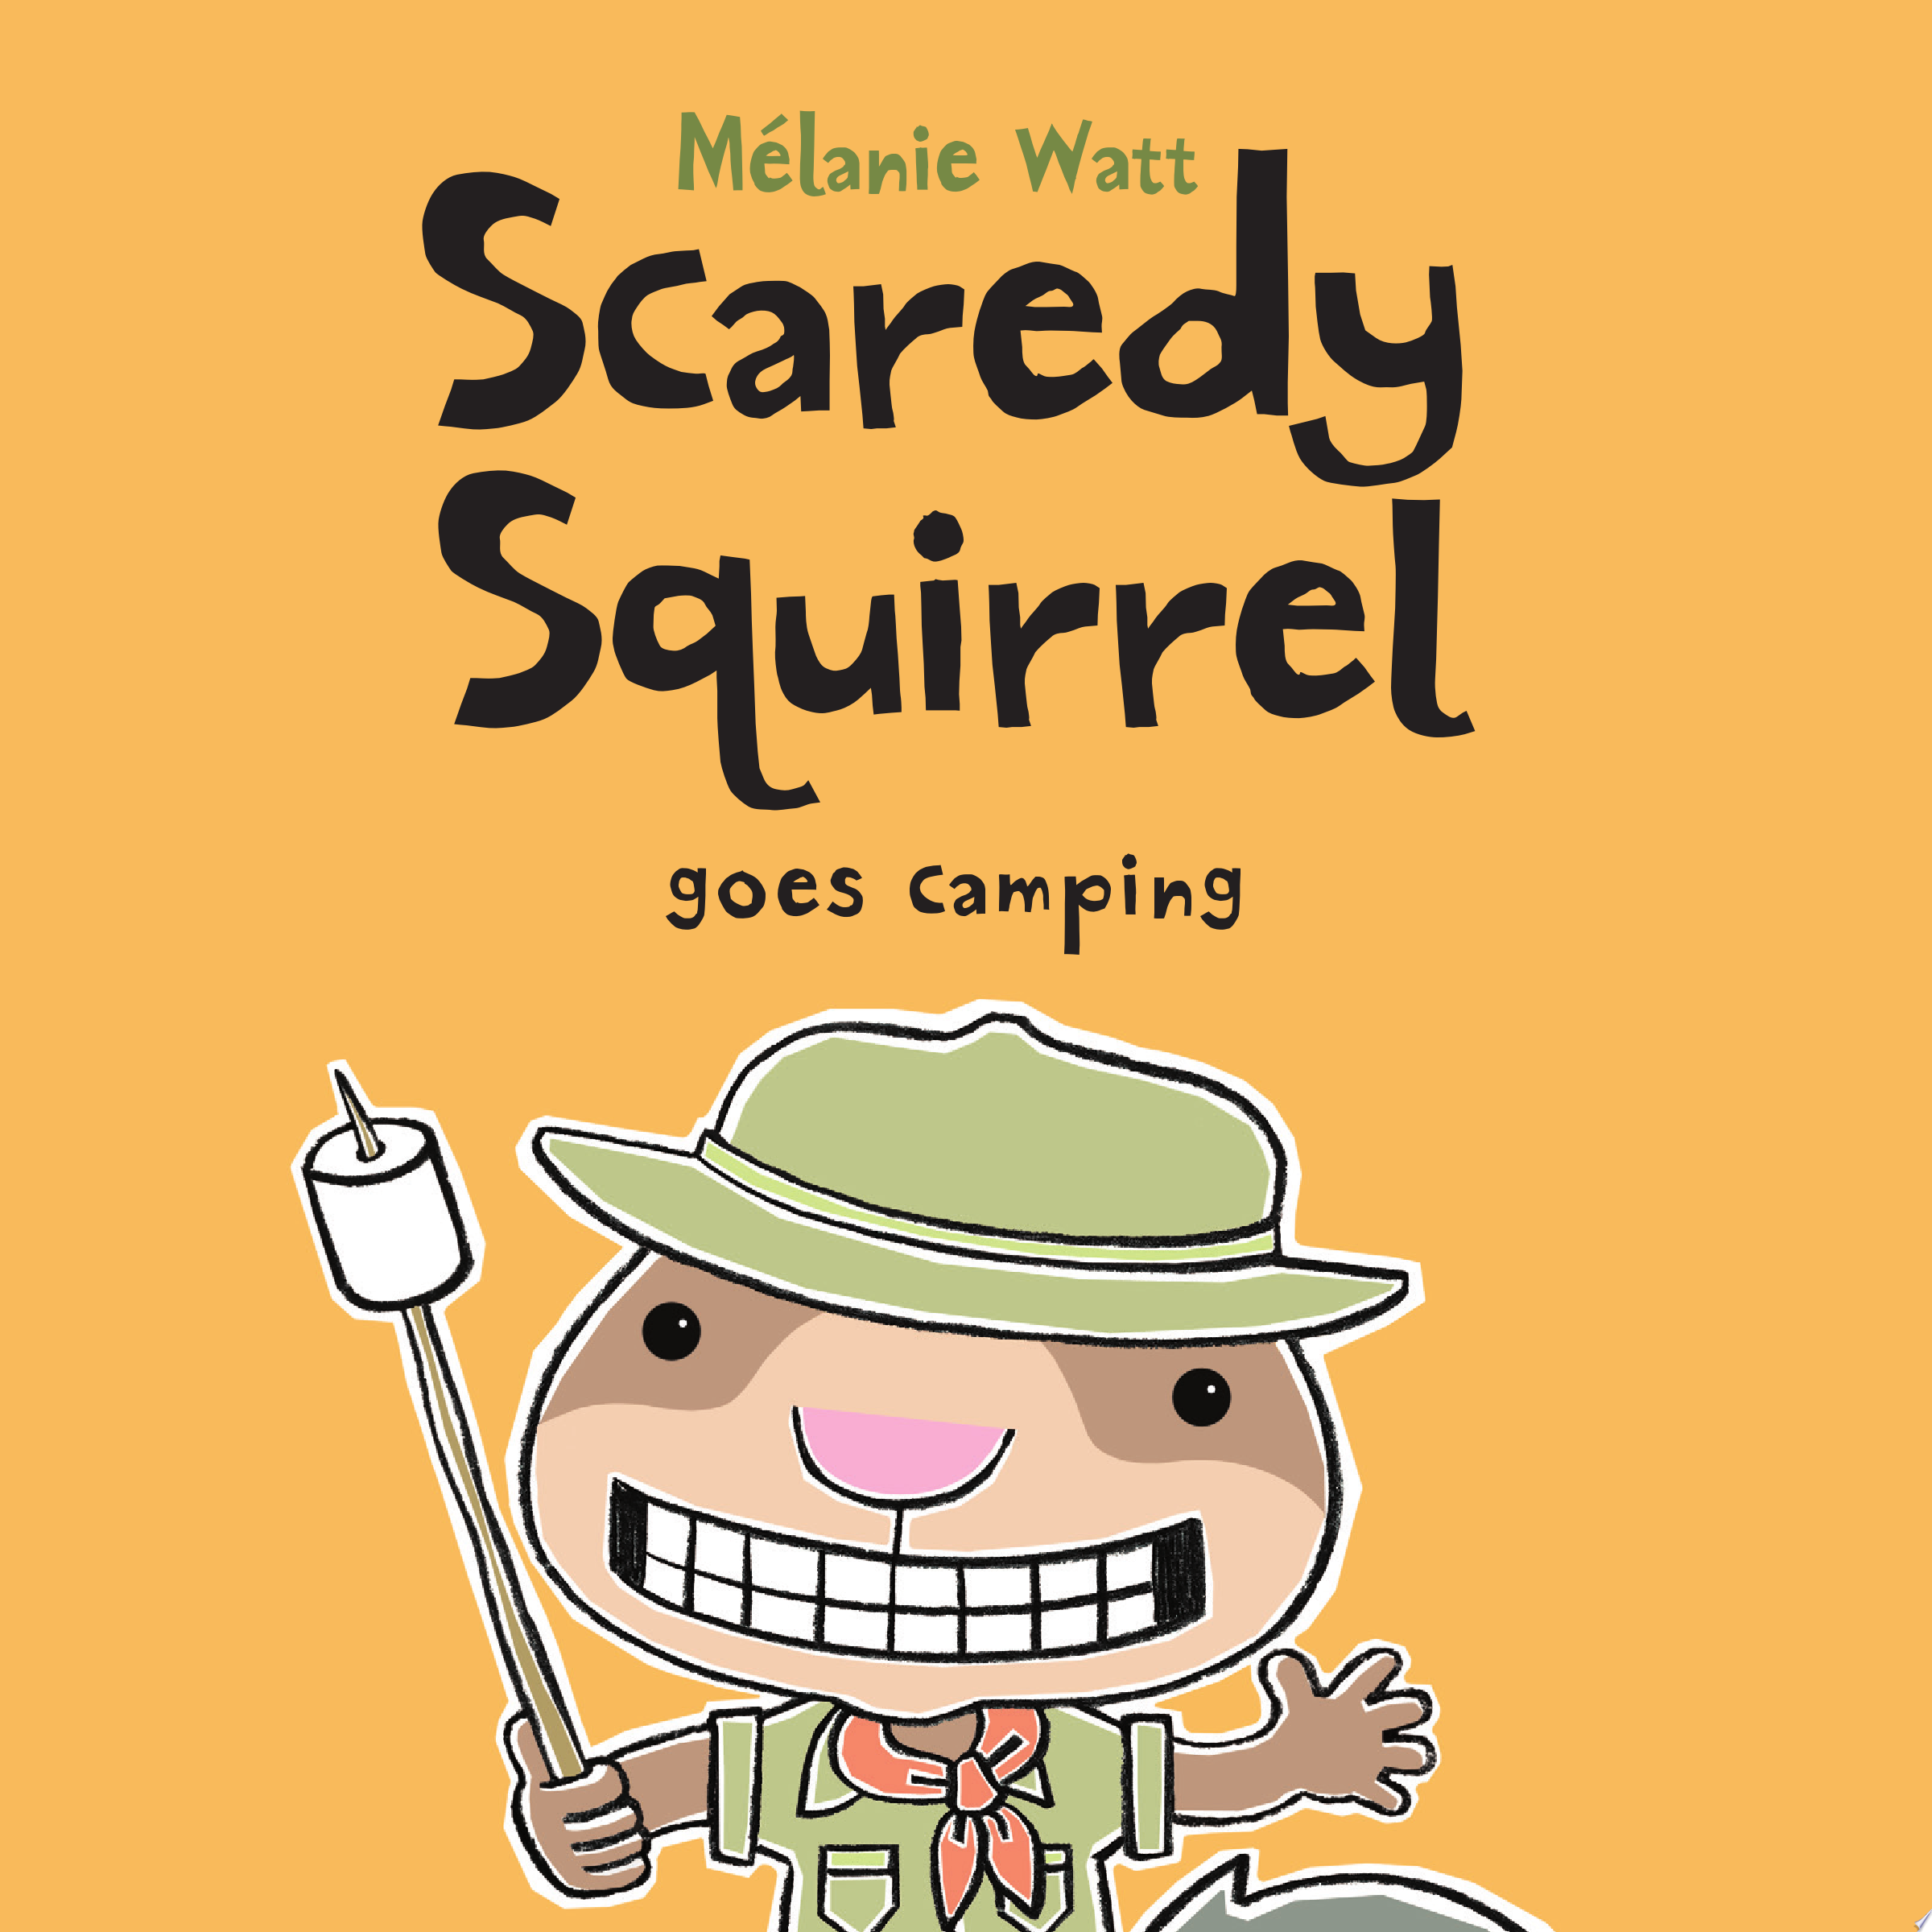 Image for "Scaredy Squirrel Goes Camping"